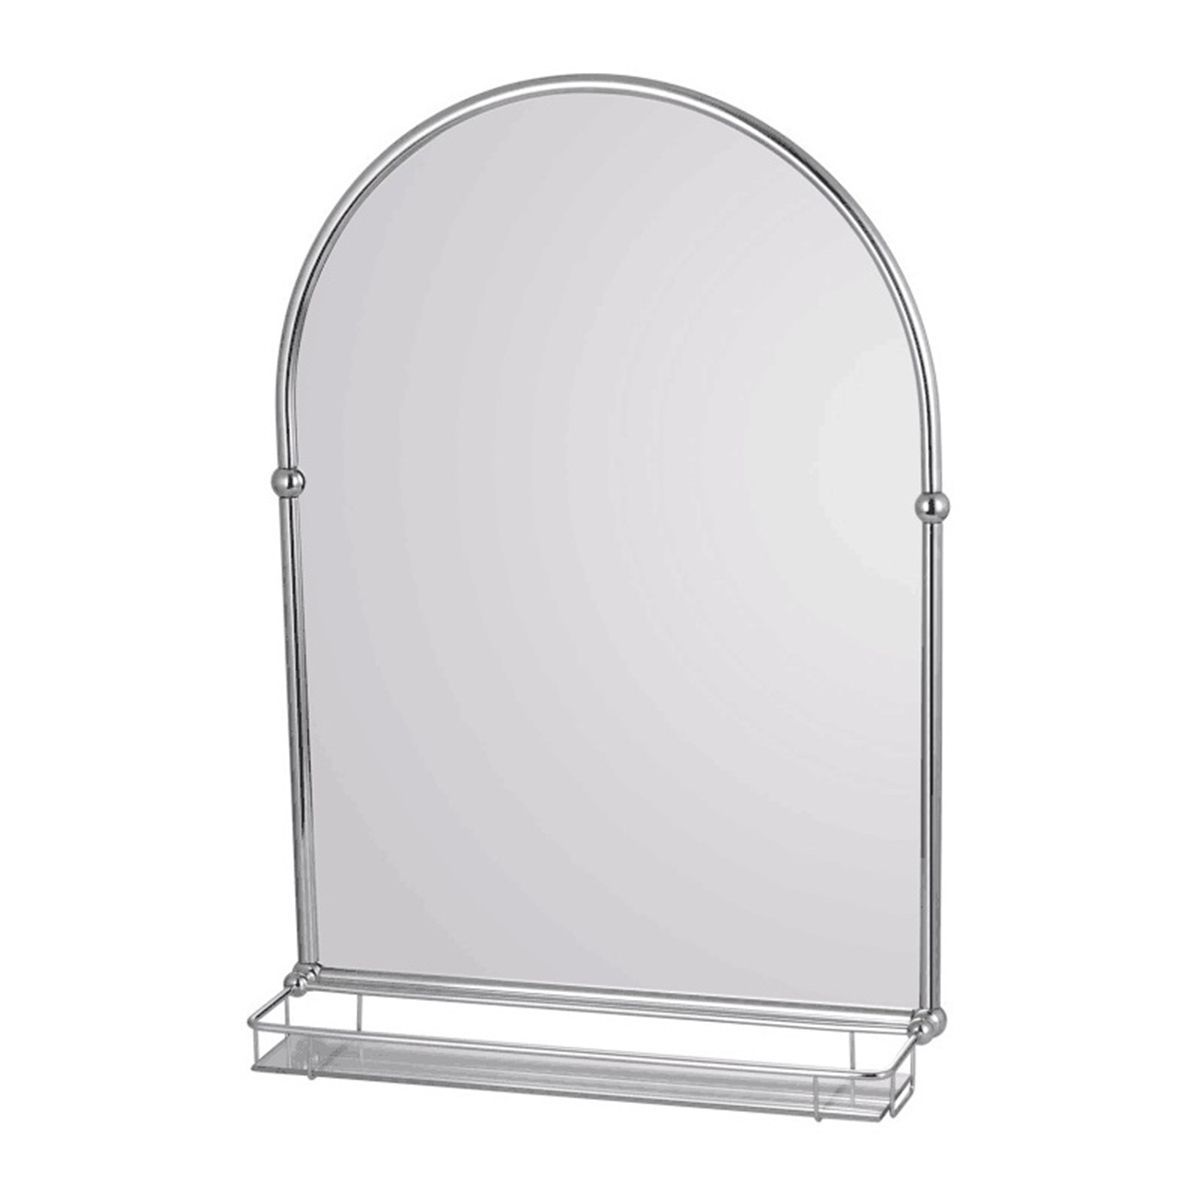 Frontline Holborn Traditional Arched Bathroom Mirror With Shelf Regarding Waved Arch Tall Traditional Wall Mirrors (View 4 of 15)